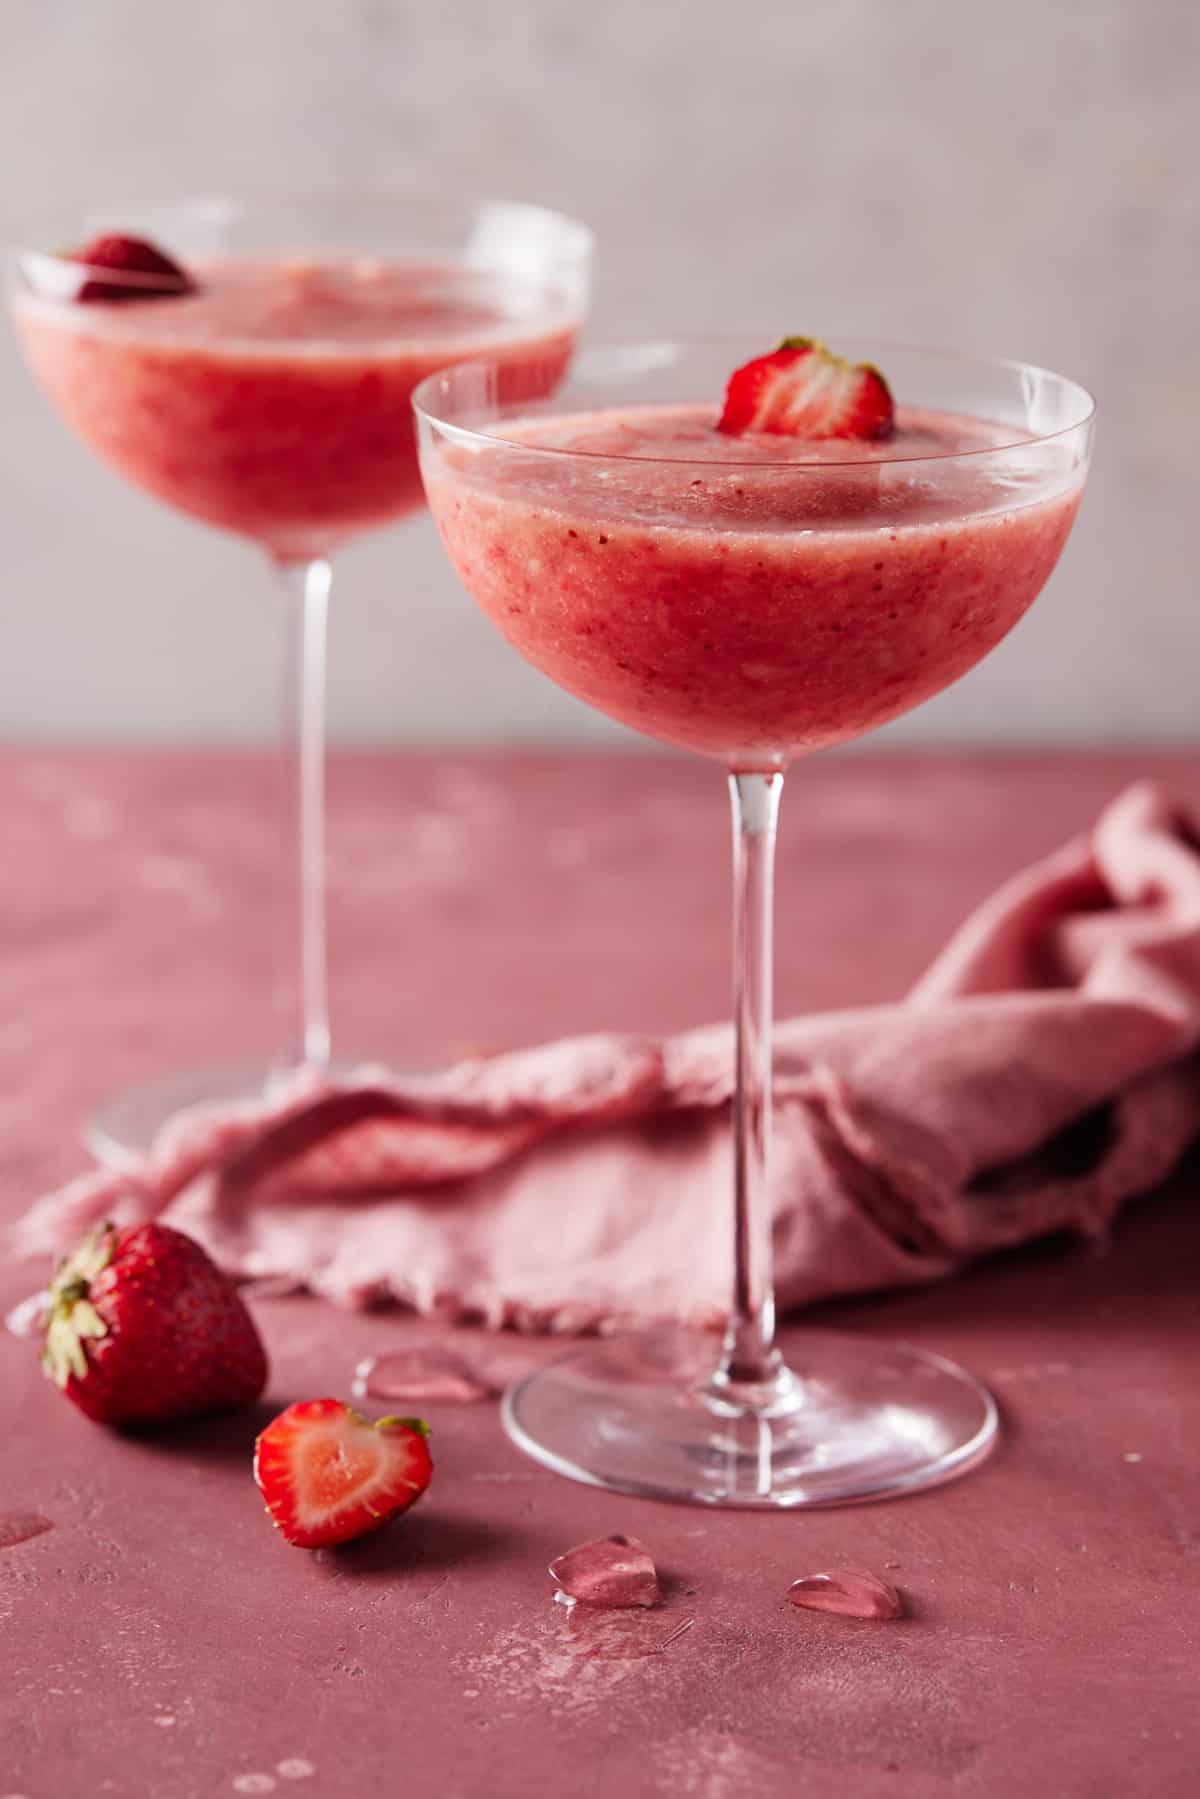 Frozen Rosé in coupe glasses with fresh strawberries for garnish.